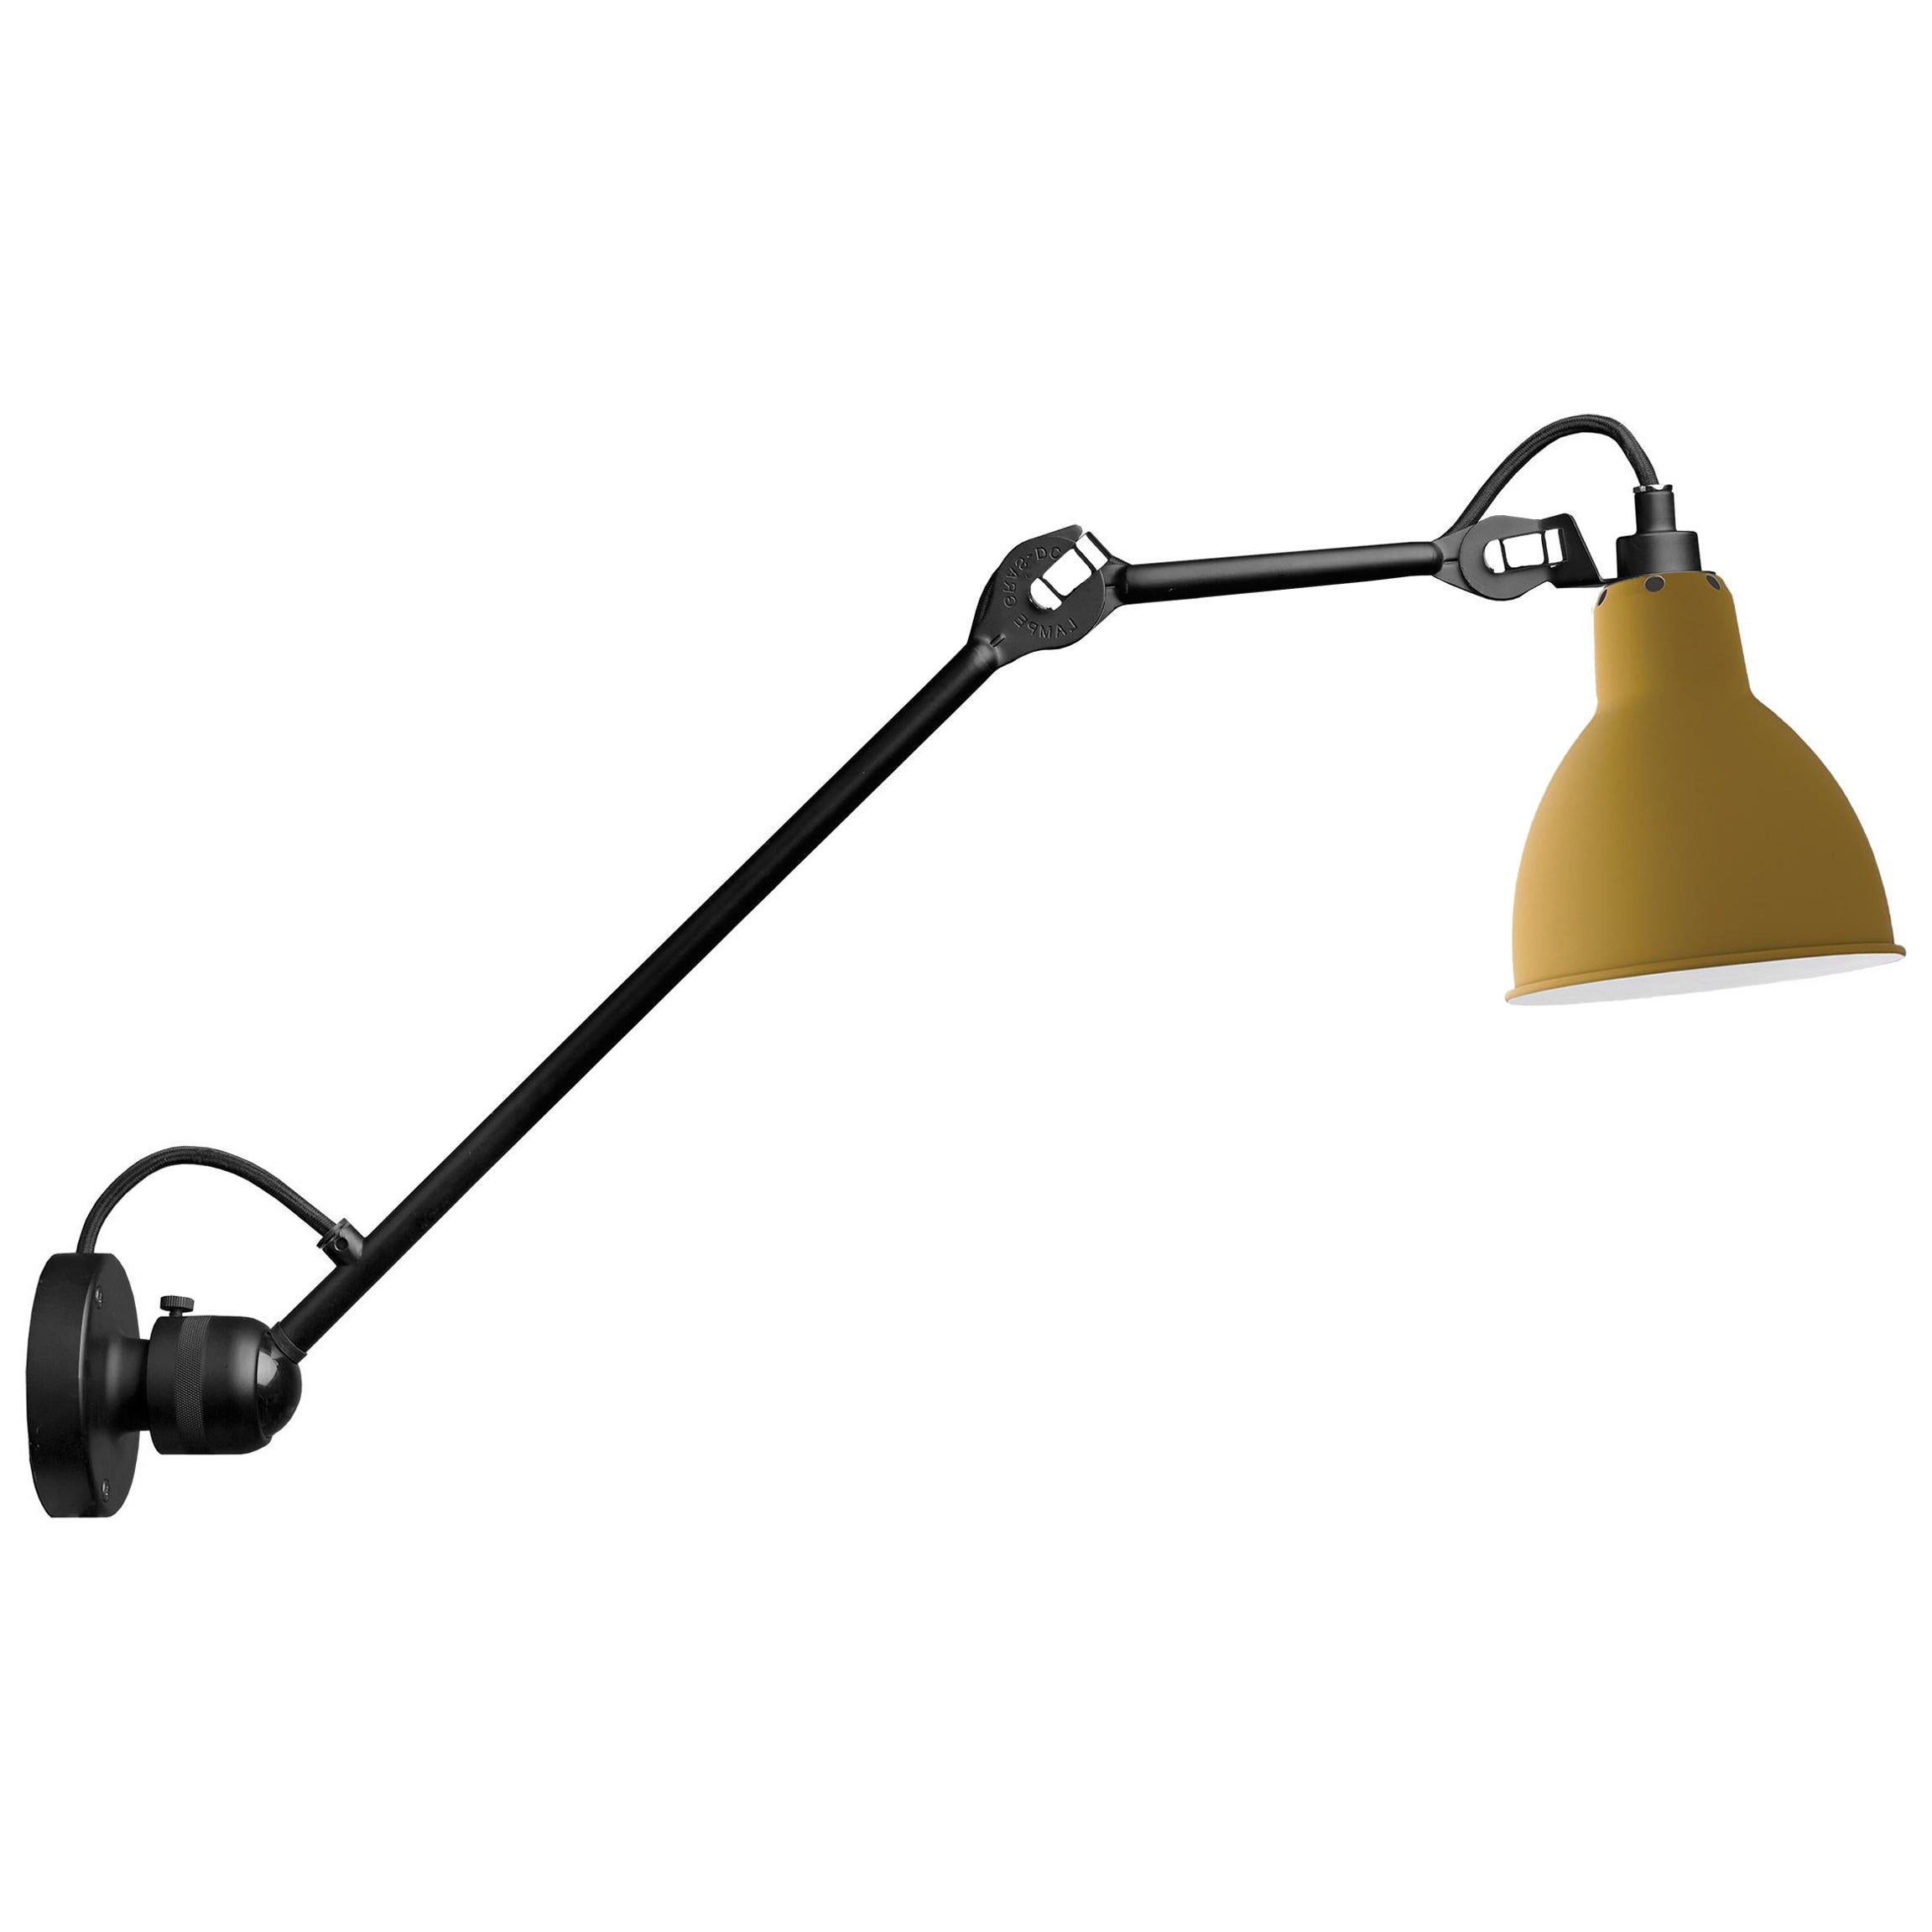 DCW Editions La Lampe Gras N°304 L40 Wall Lamp in Black Arm and Yellow Shade